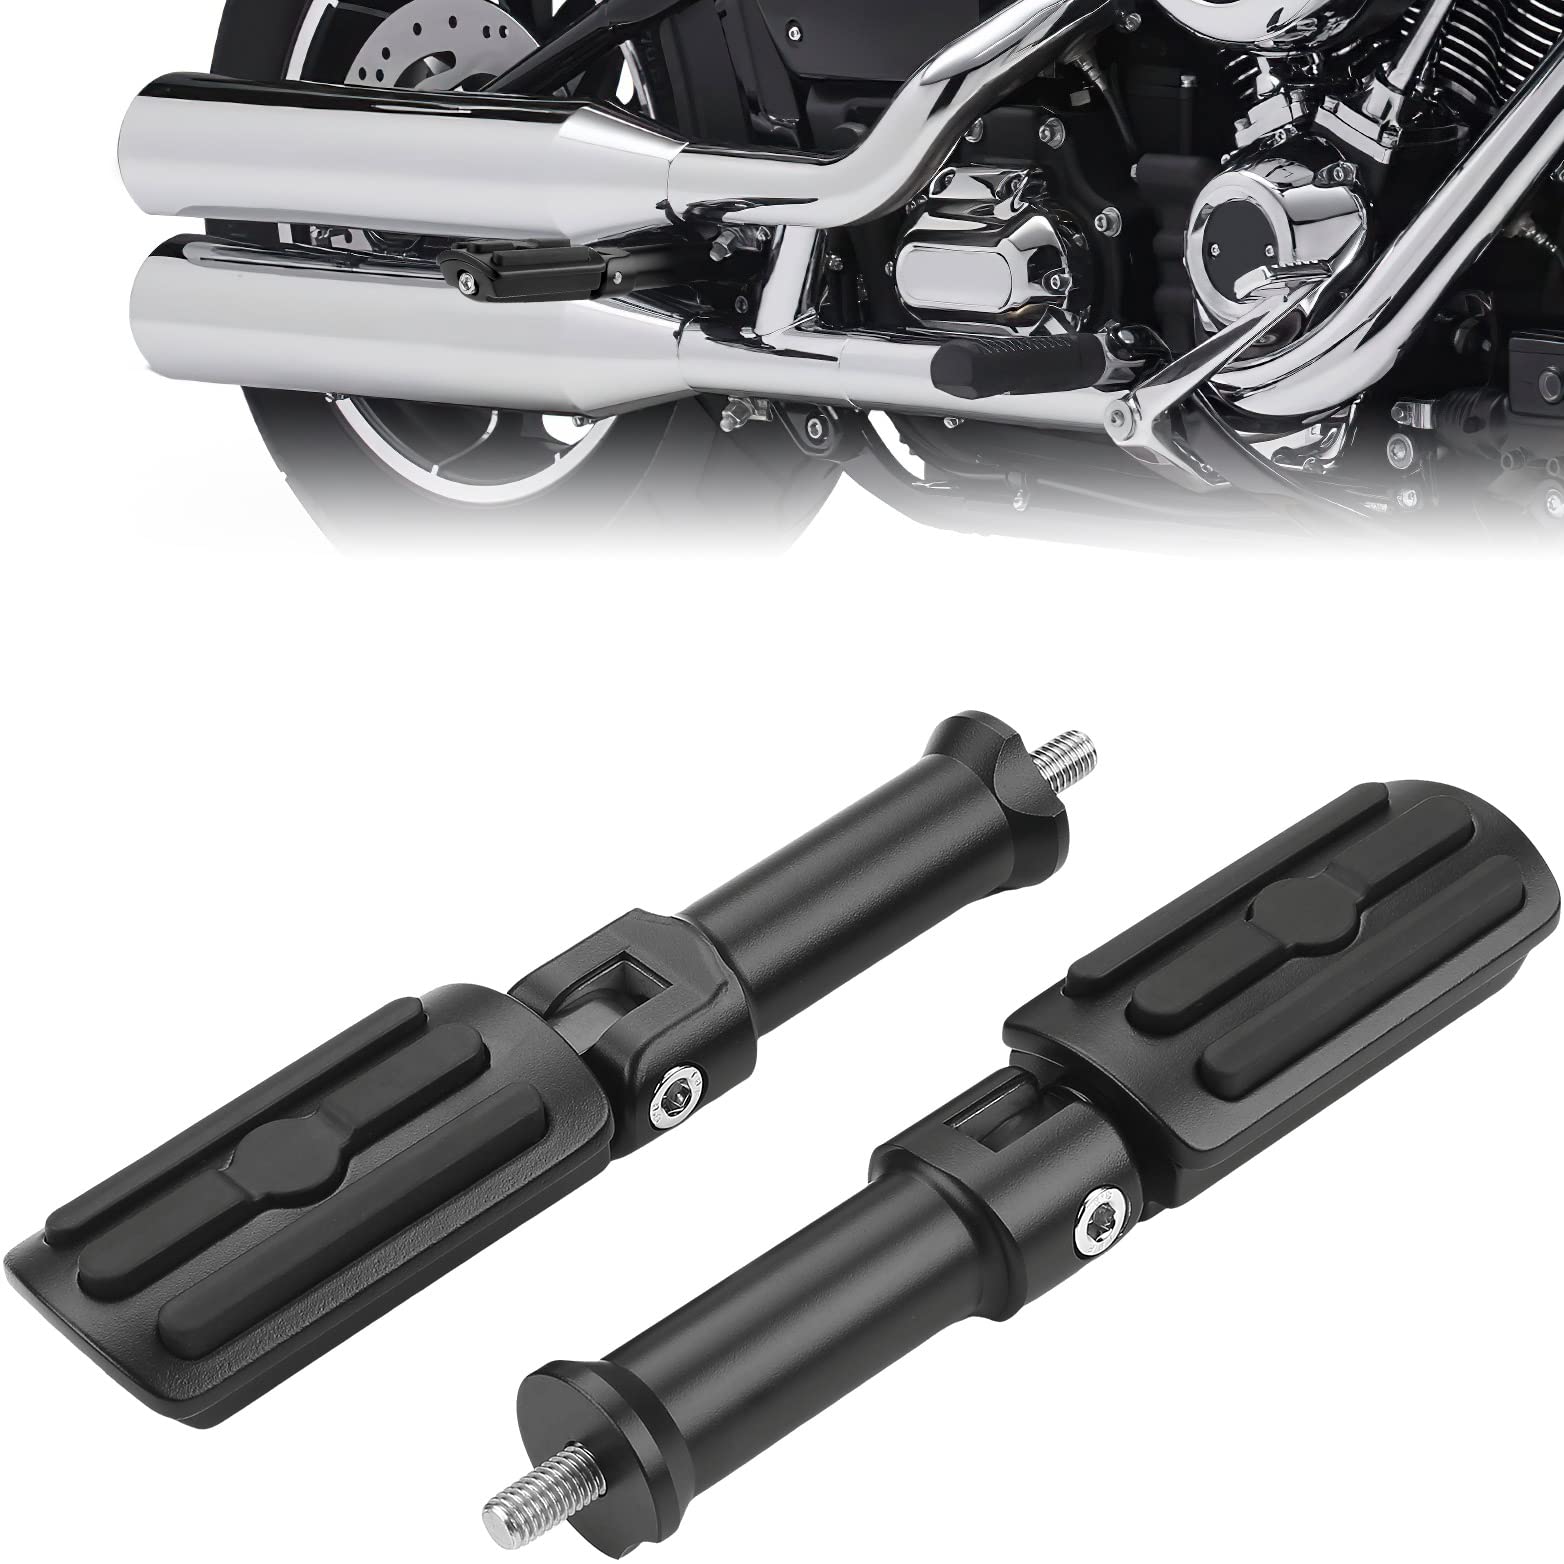 Passenger Foot Pegs with Support Mounting Kit for Softail – Kemimoto